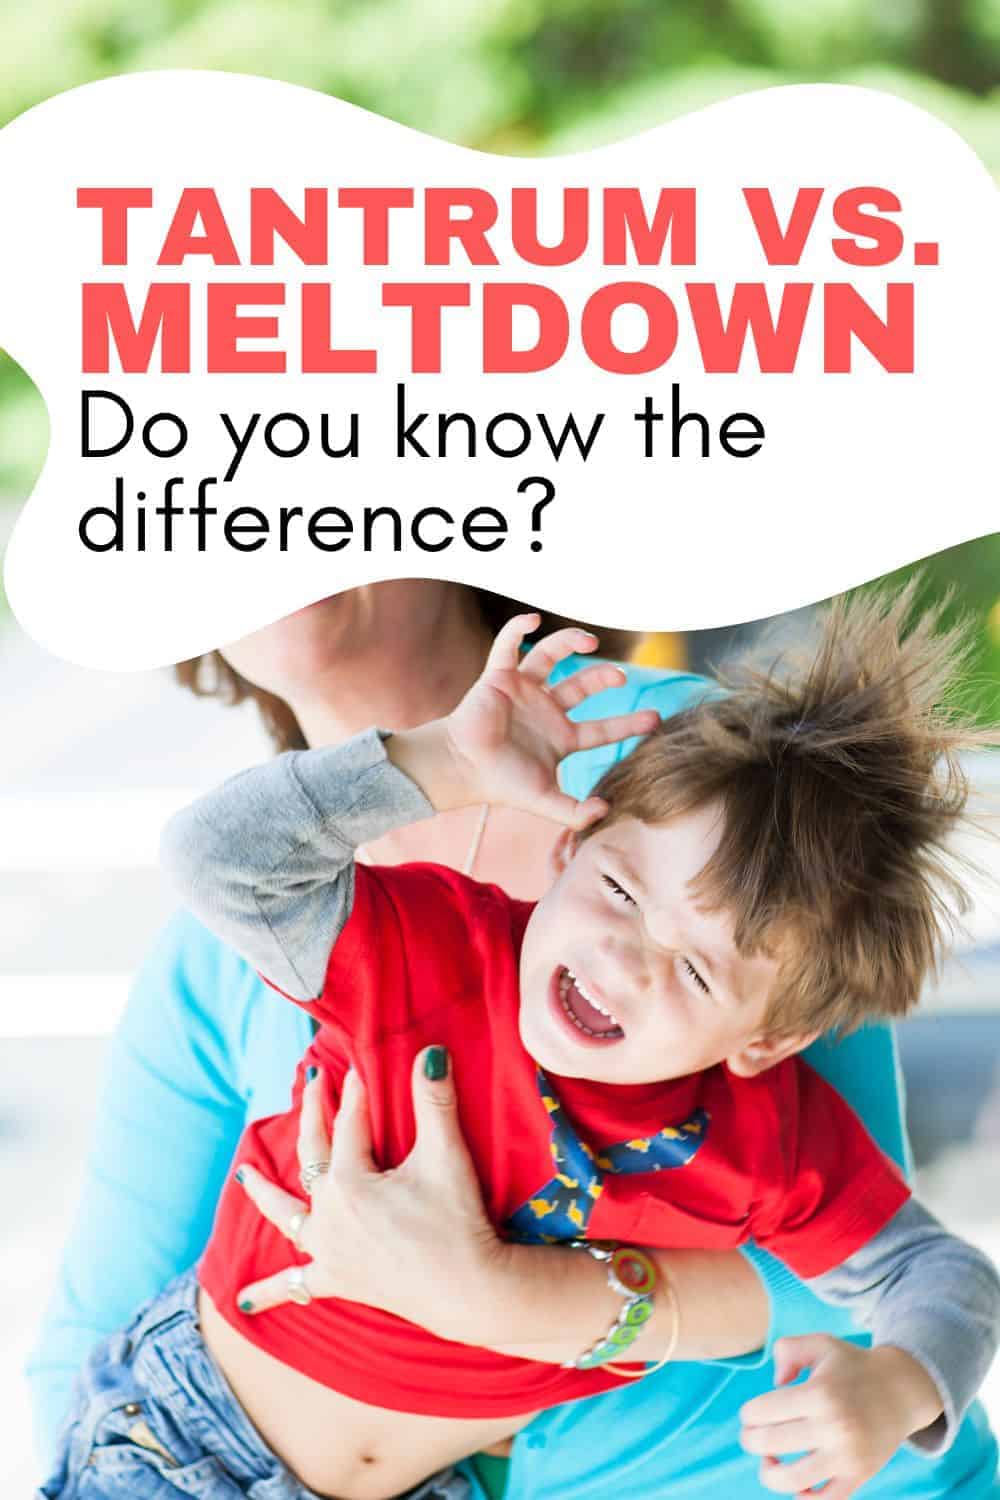 Is your child having a sensory meltdown or a tantrum? Learn exactly how to tell the difference between a sensory meltdown vs. tantrum and how to help your child’s sensory processing when they are having a sensory overload meltdown.